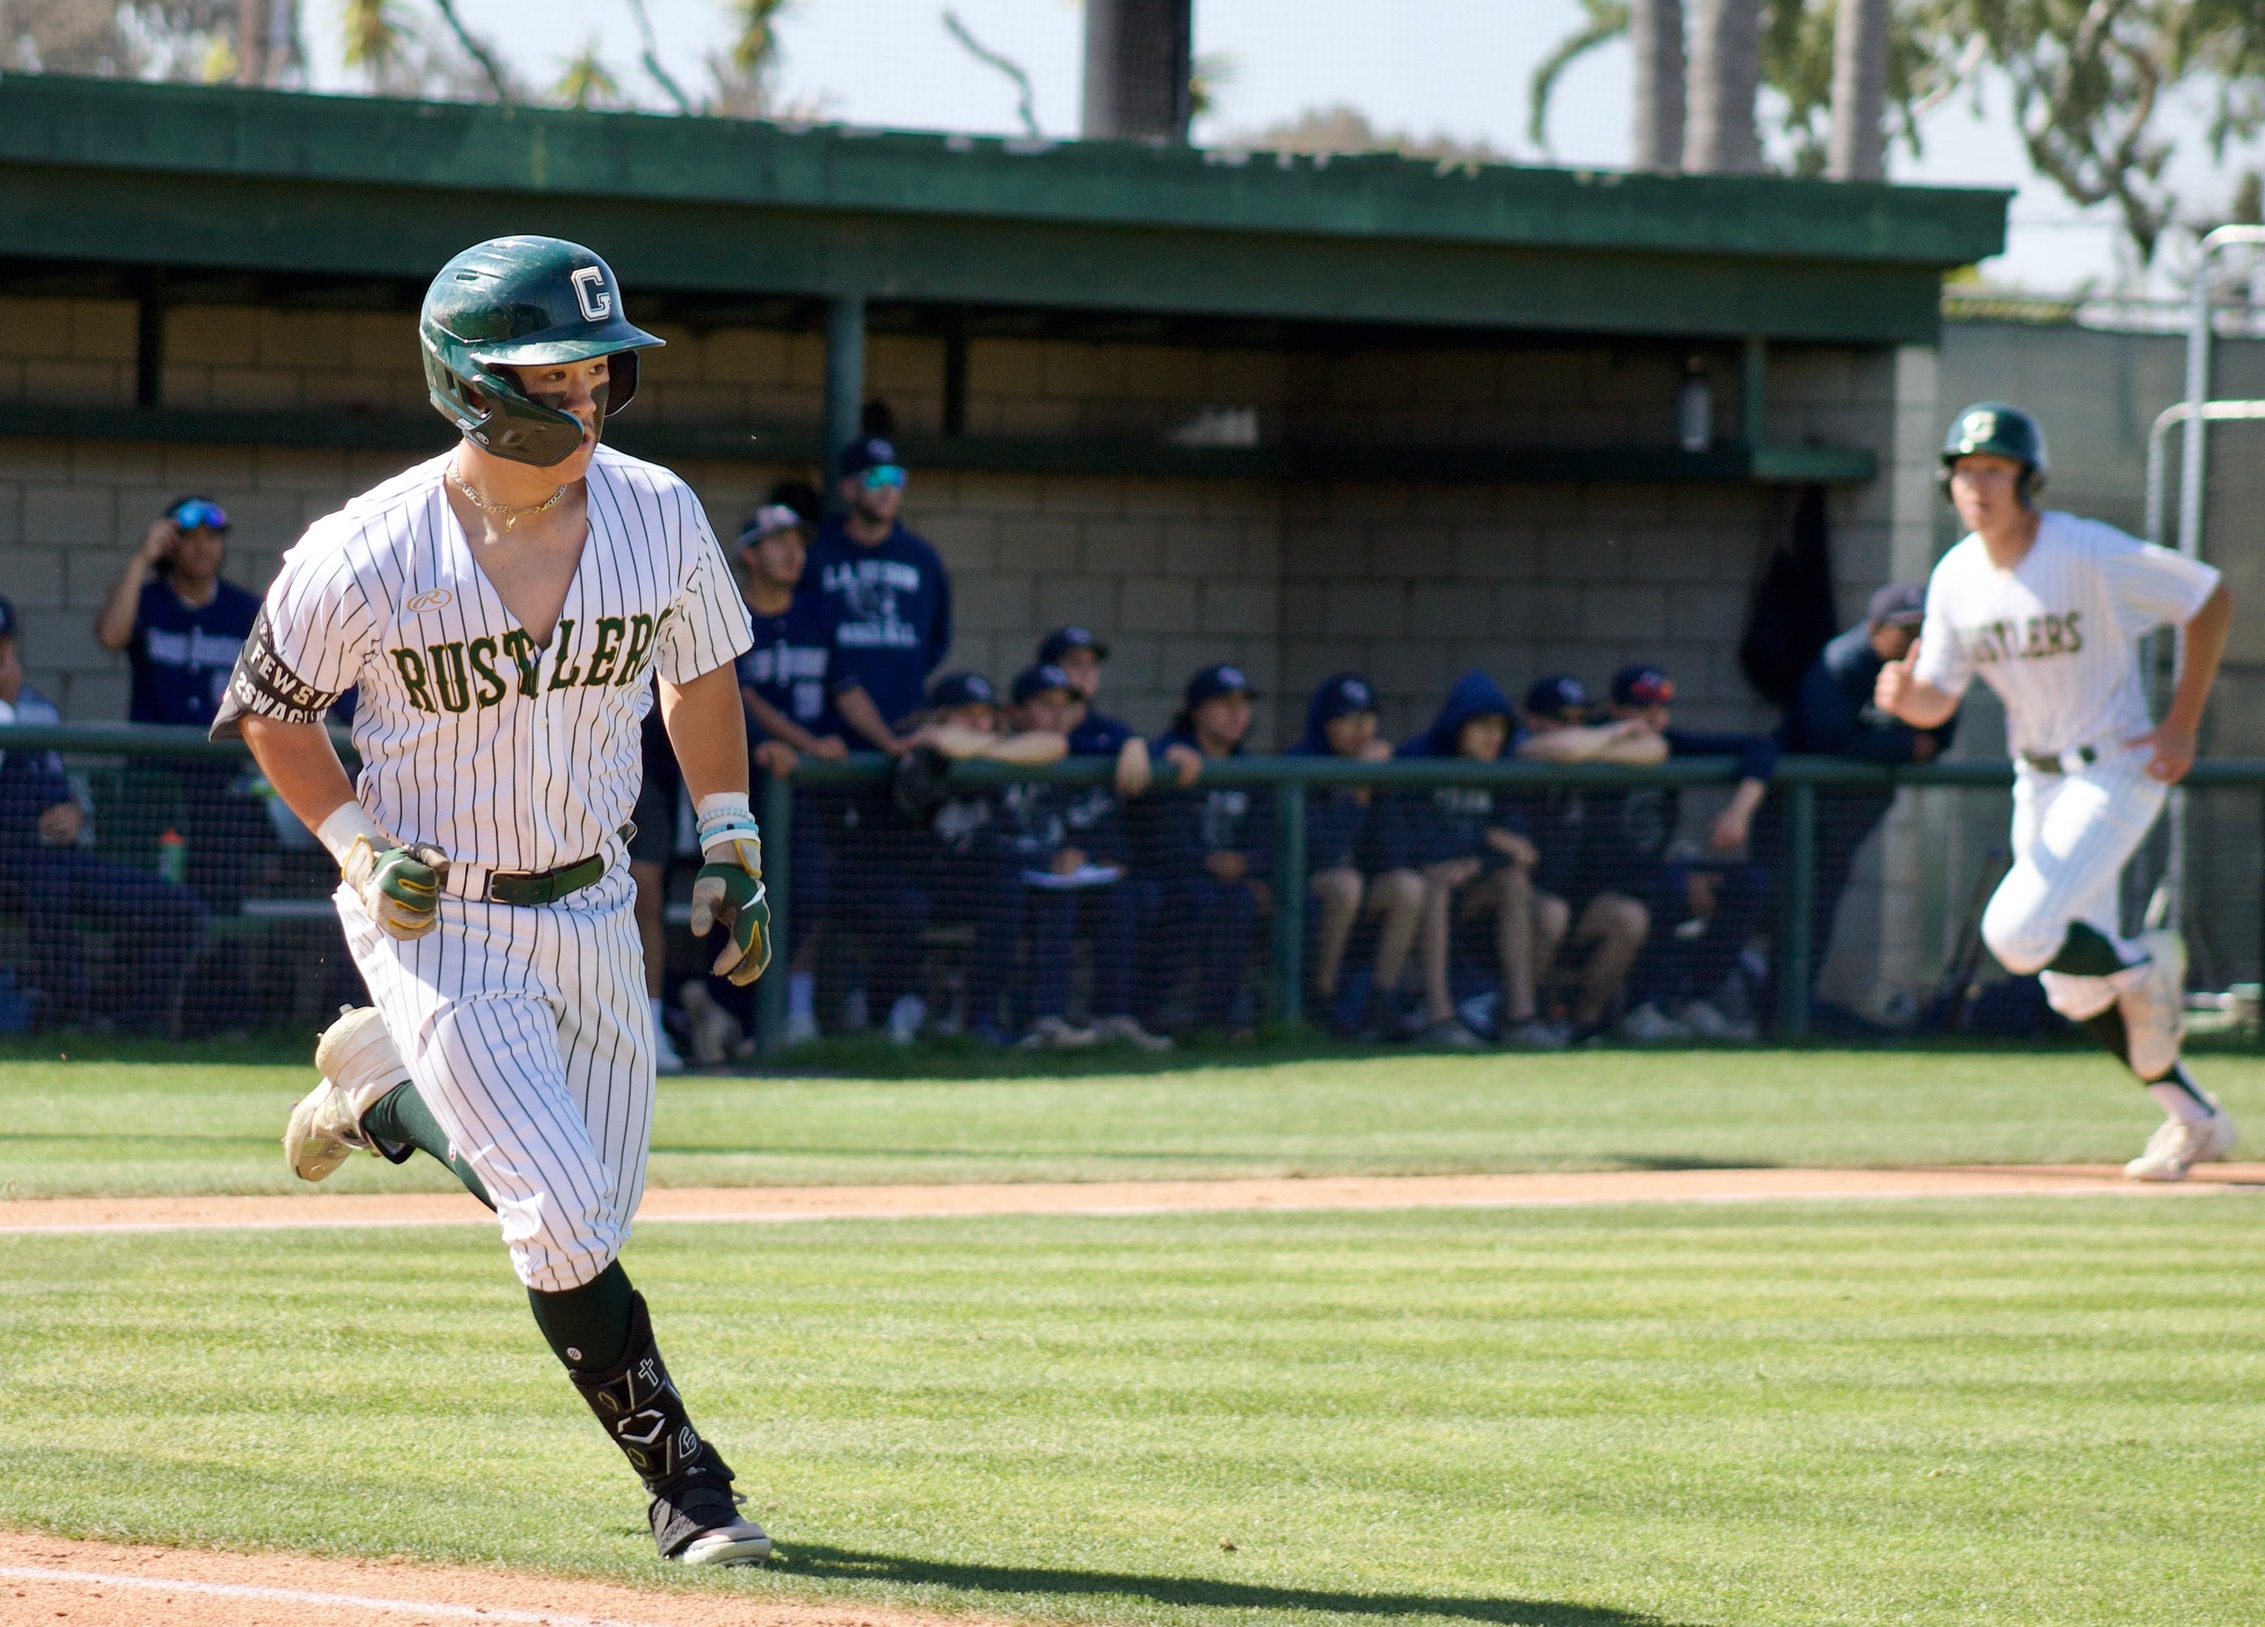 Baseball: The Rustler Offense Explodes for 16 Runs in Rout of Pirates